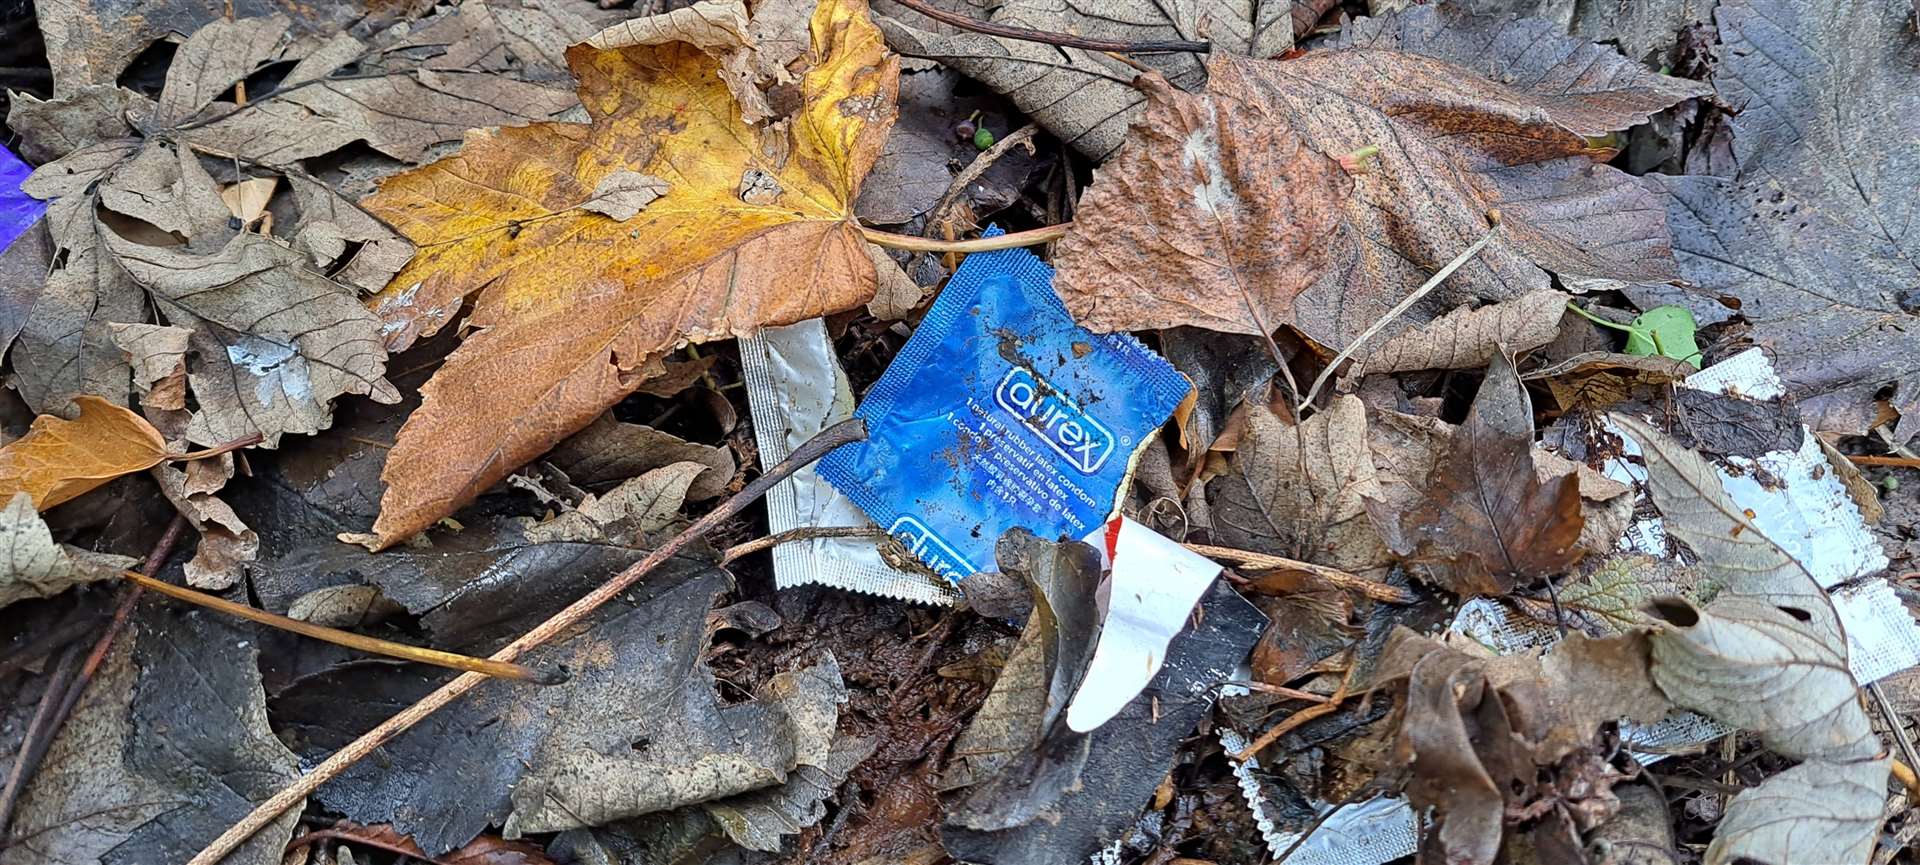 Condom packets at Borden Nature Reserve. Picture: Megan Carr